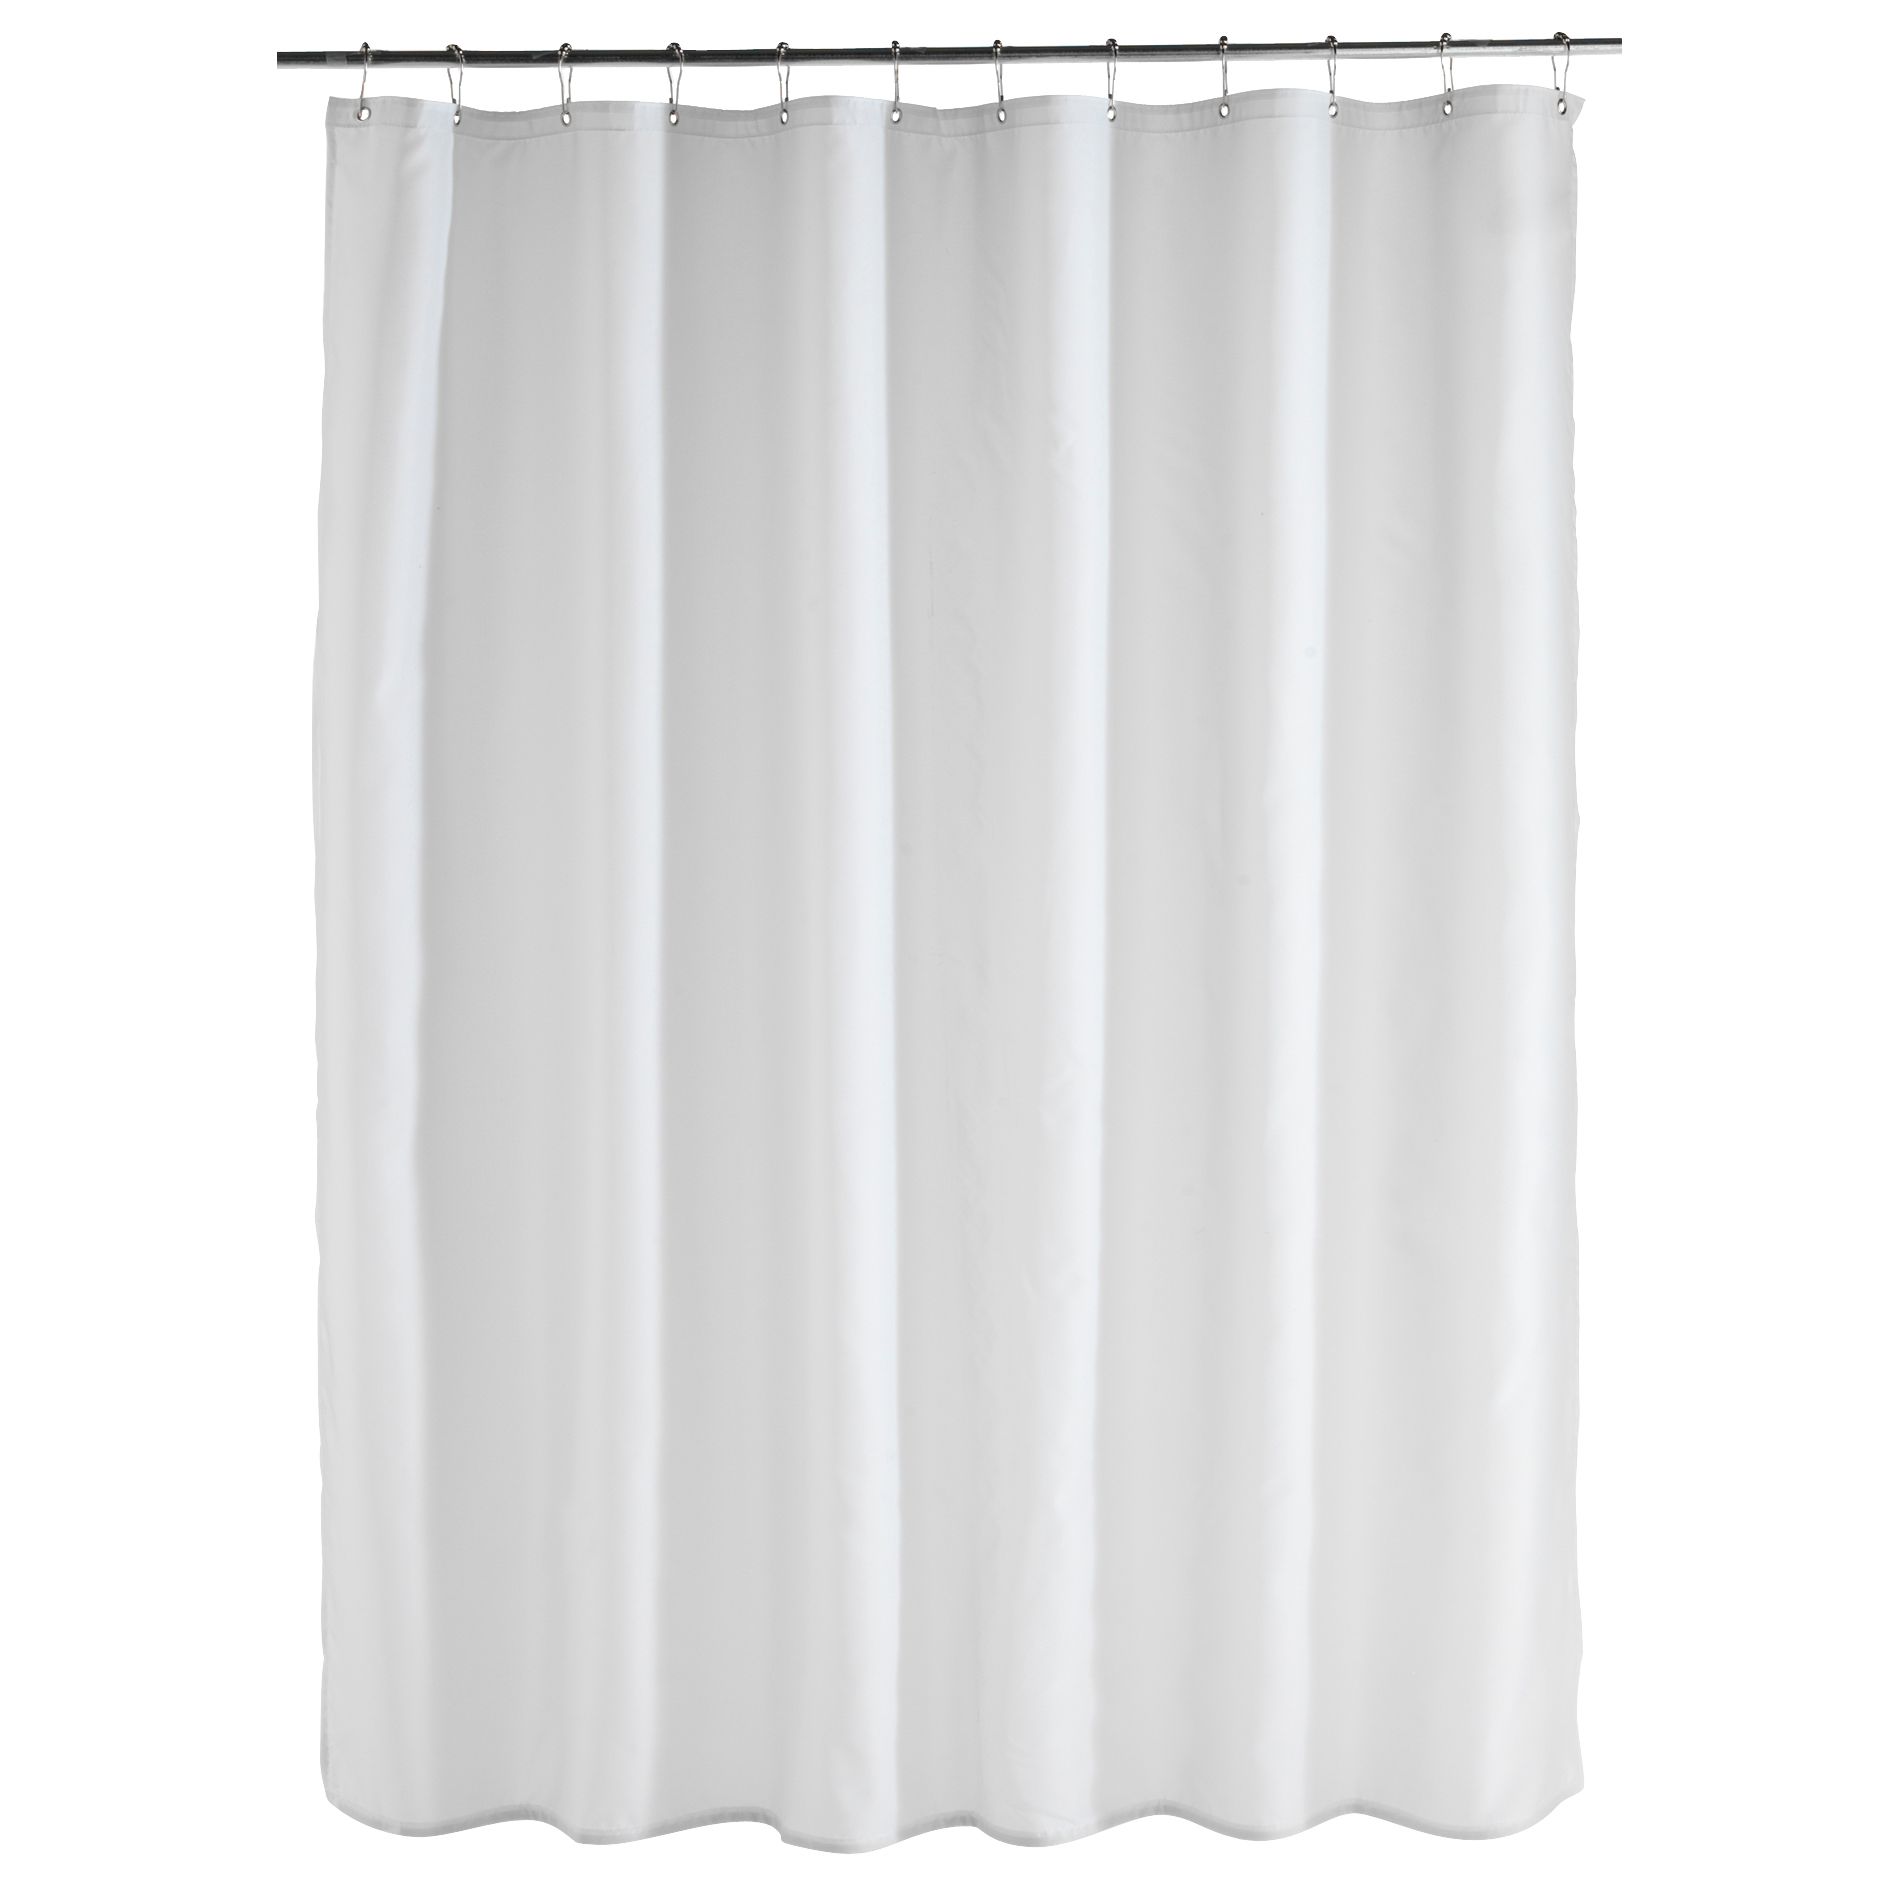 Essential Home Shower Curtain Liner Fabric